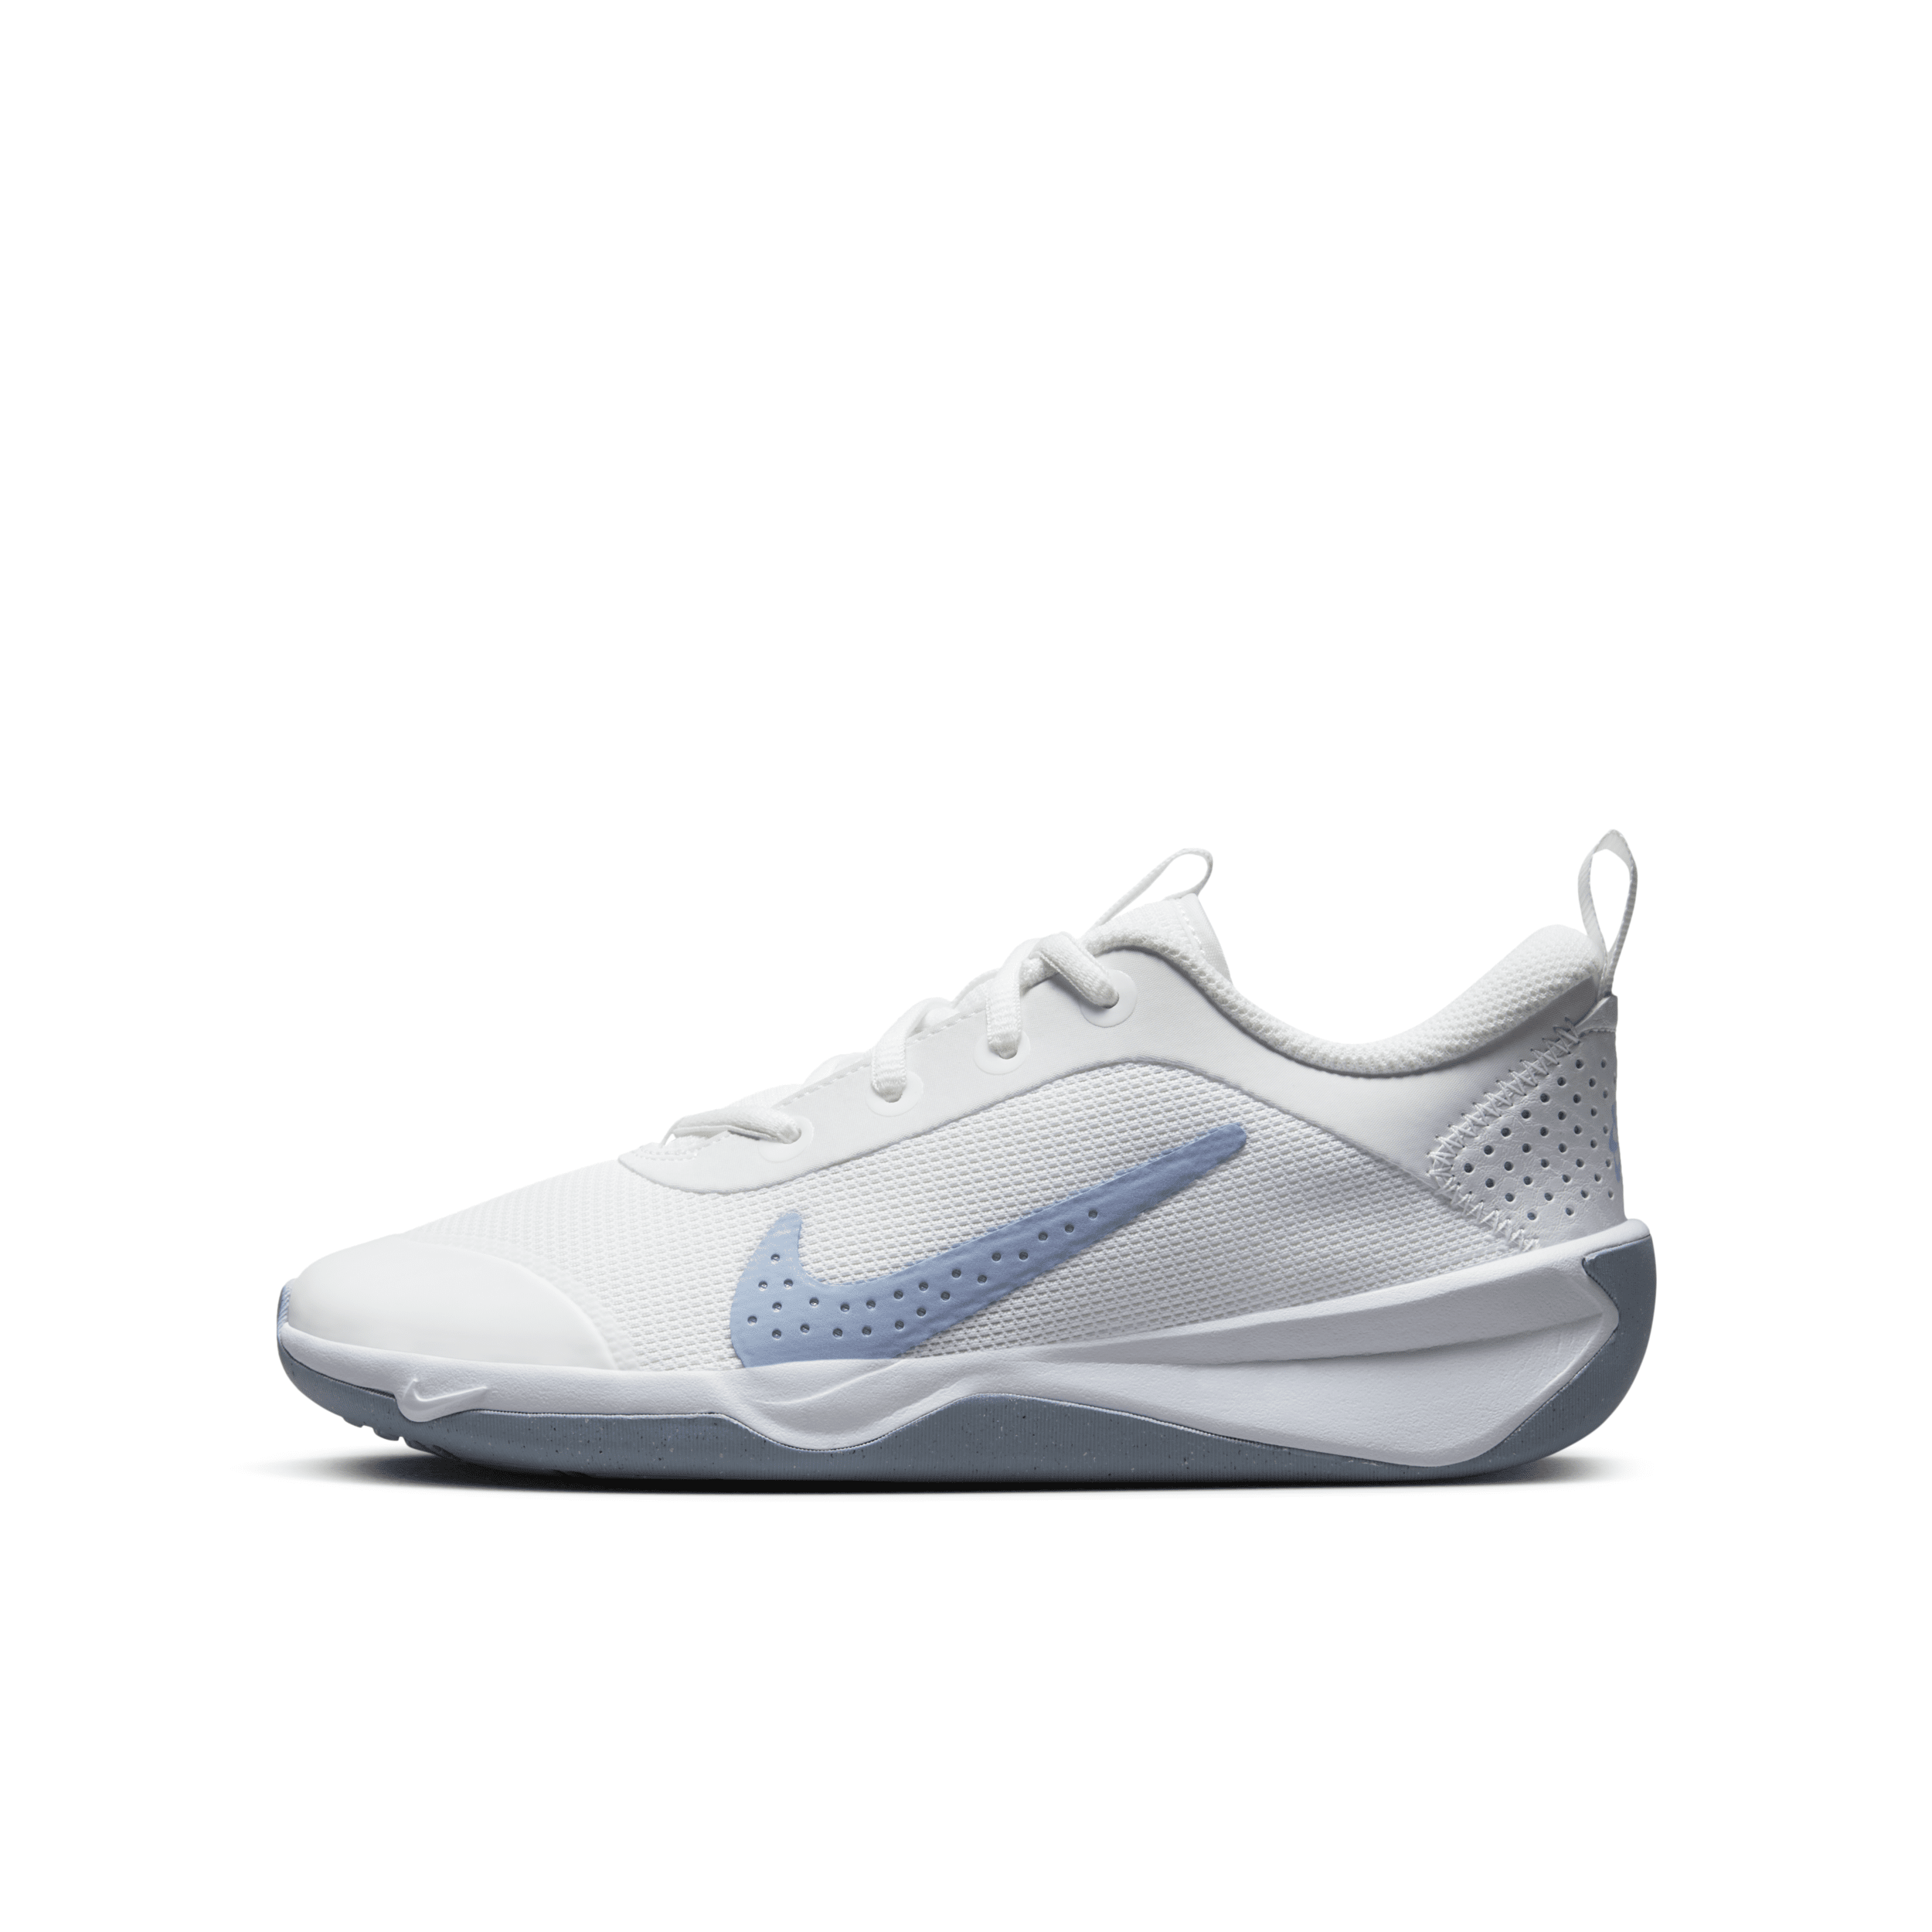 Nike Omni Multi-court Big Kids' Indoor Court Shoes In White